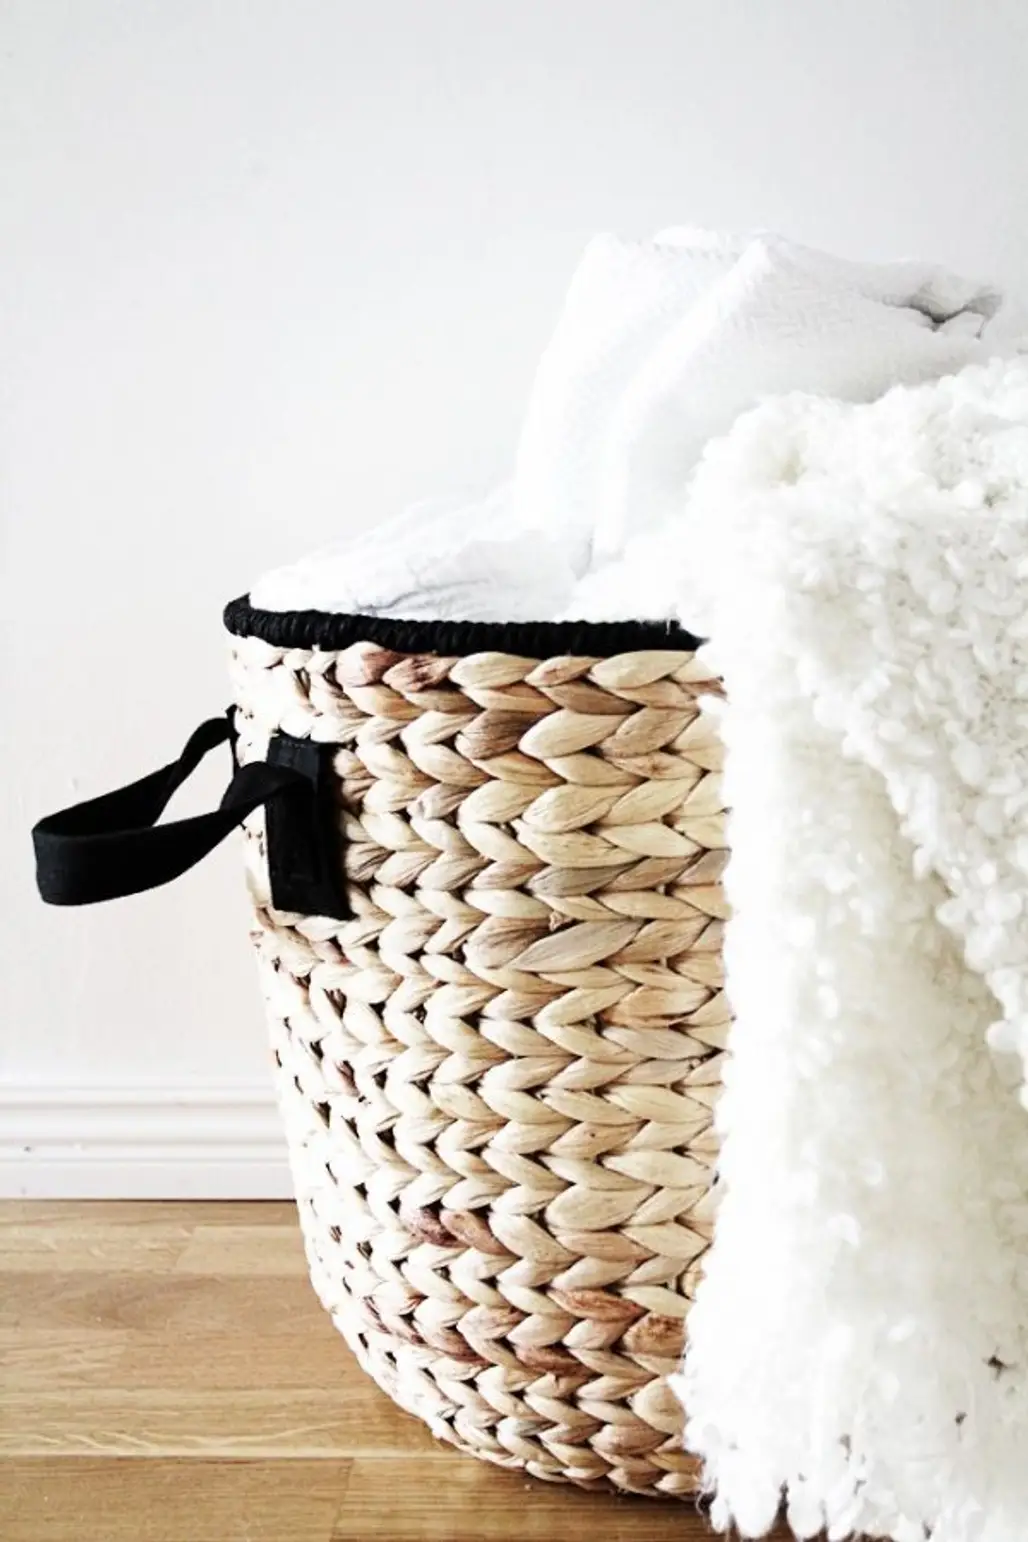 In a Decorative Basket on the Floor